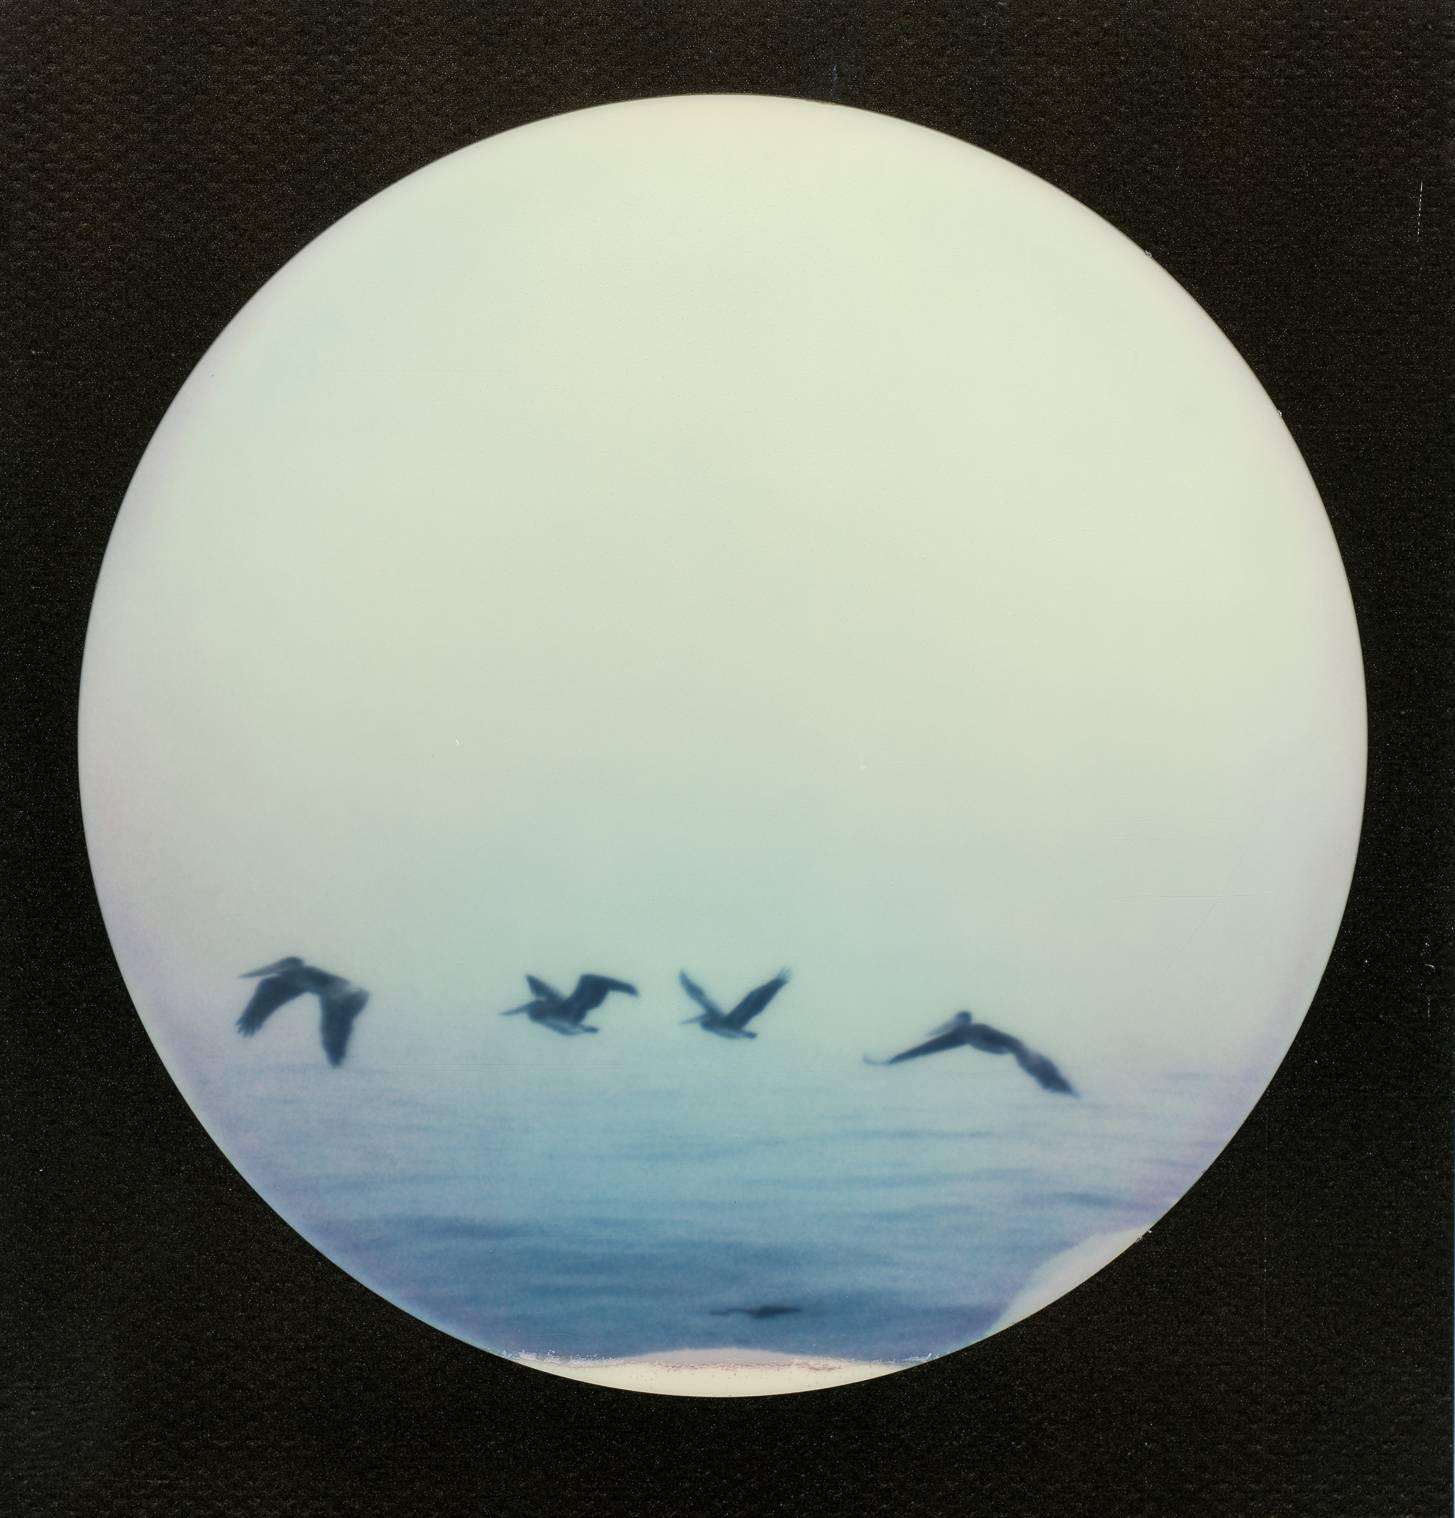 Pelican Party, 2016, Edition 2/7 plus 2 Artist Proofs
Based on an original Polaroid, Digital C-print, not mounted.
Signed on the back and with certificate.
Artist inventory PL2016-117

Kirsten Thys van den Audenaerde is a self-taught freelance